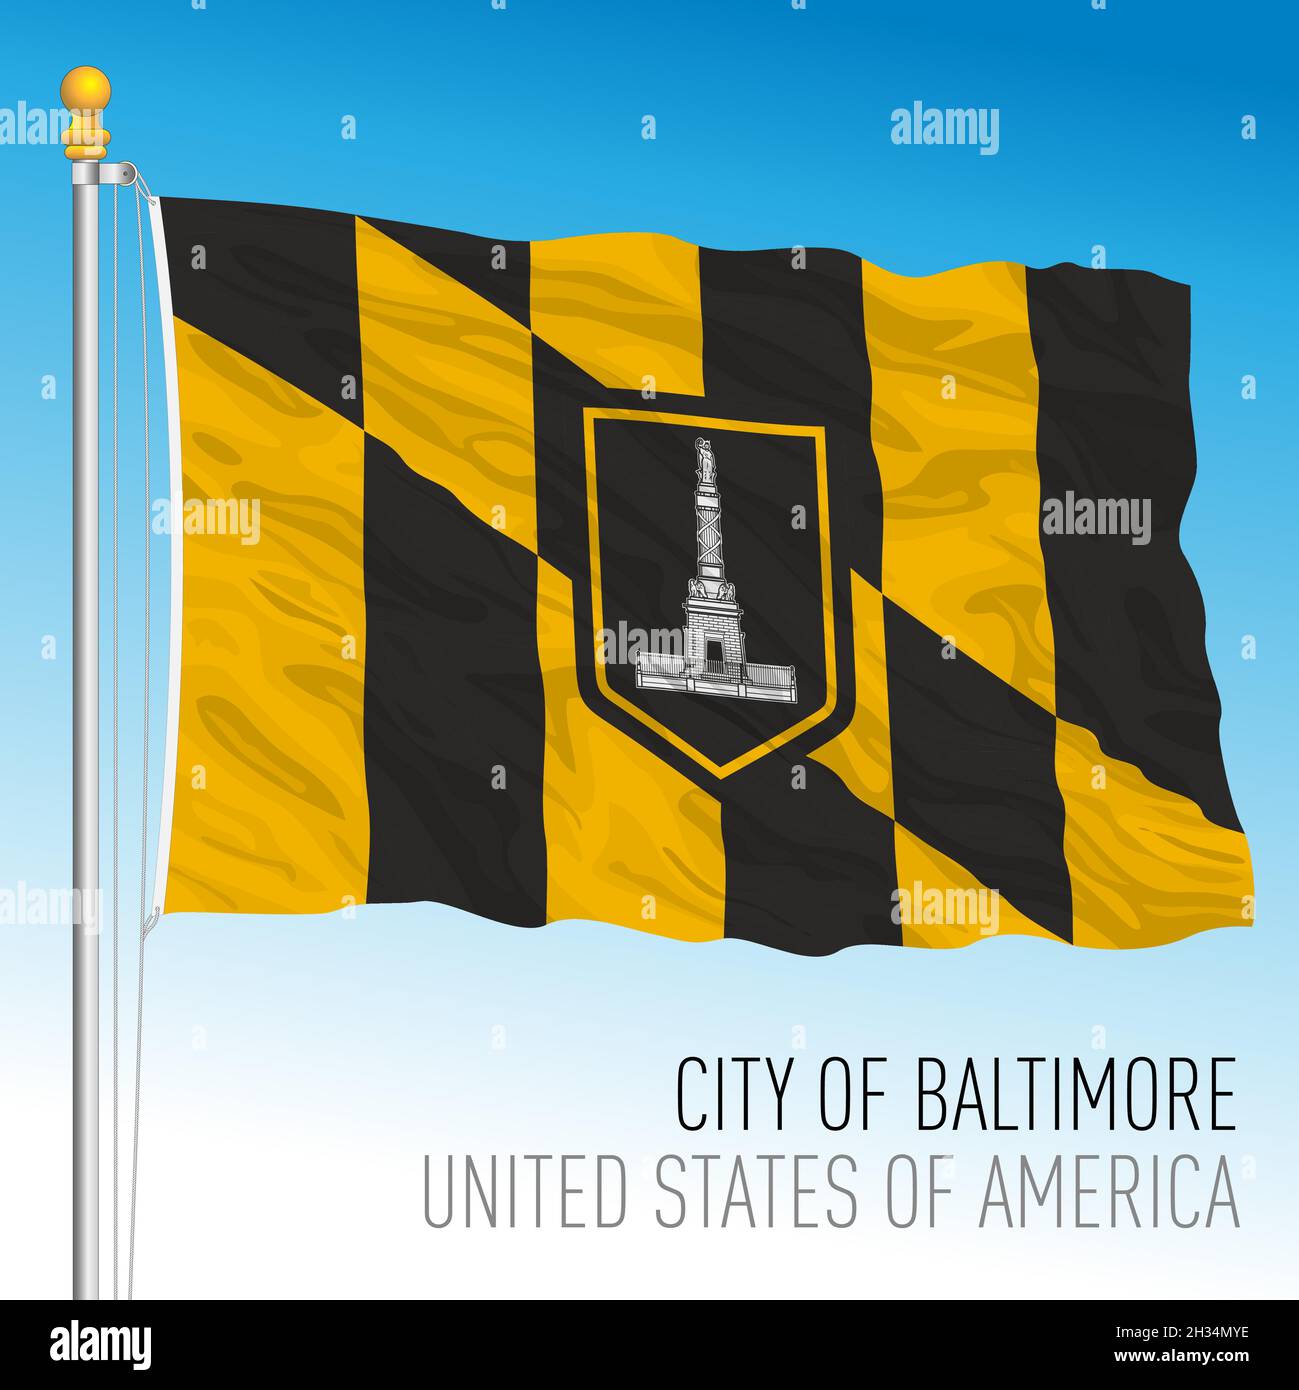 City of Baltimore flag, Maryland, United States, vector illustration Stock Vector